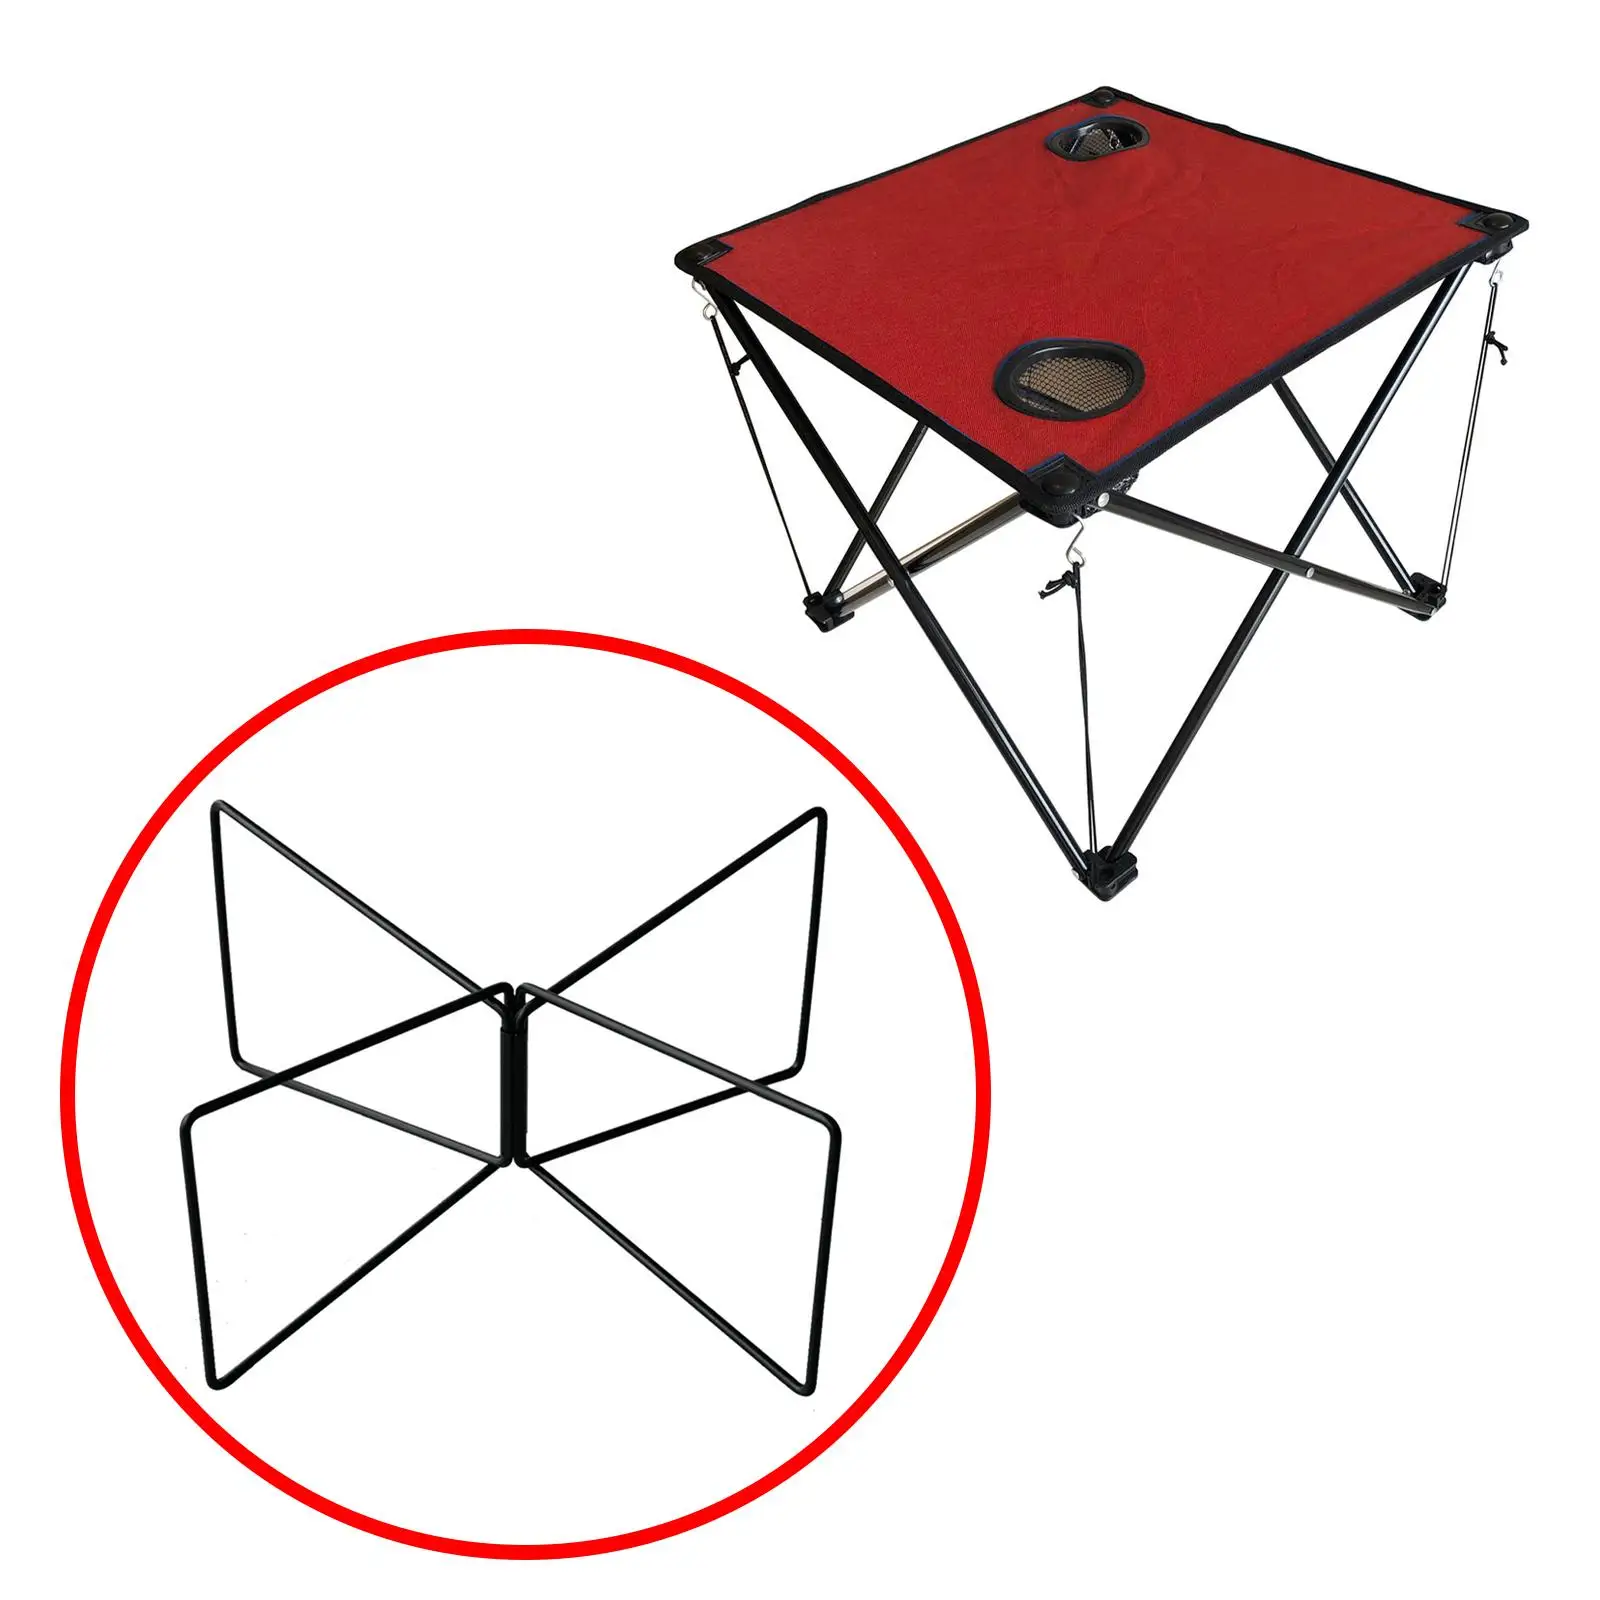 Folding Cooler Stand Sturdy Stand Rack Foldable for Household Picnic Outdoor